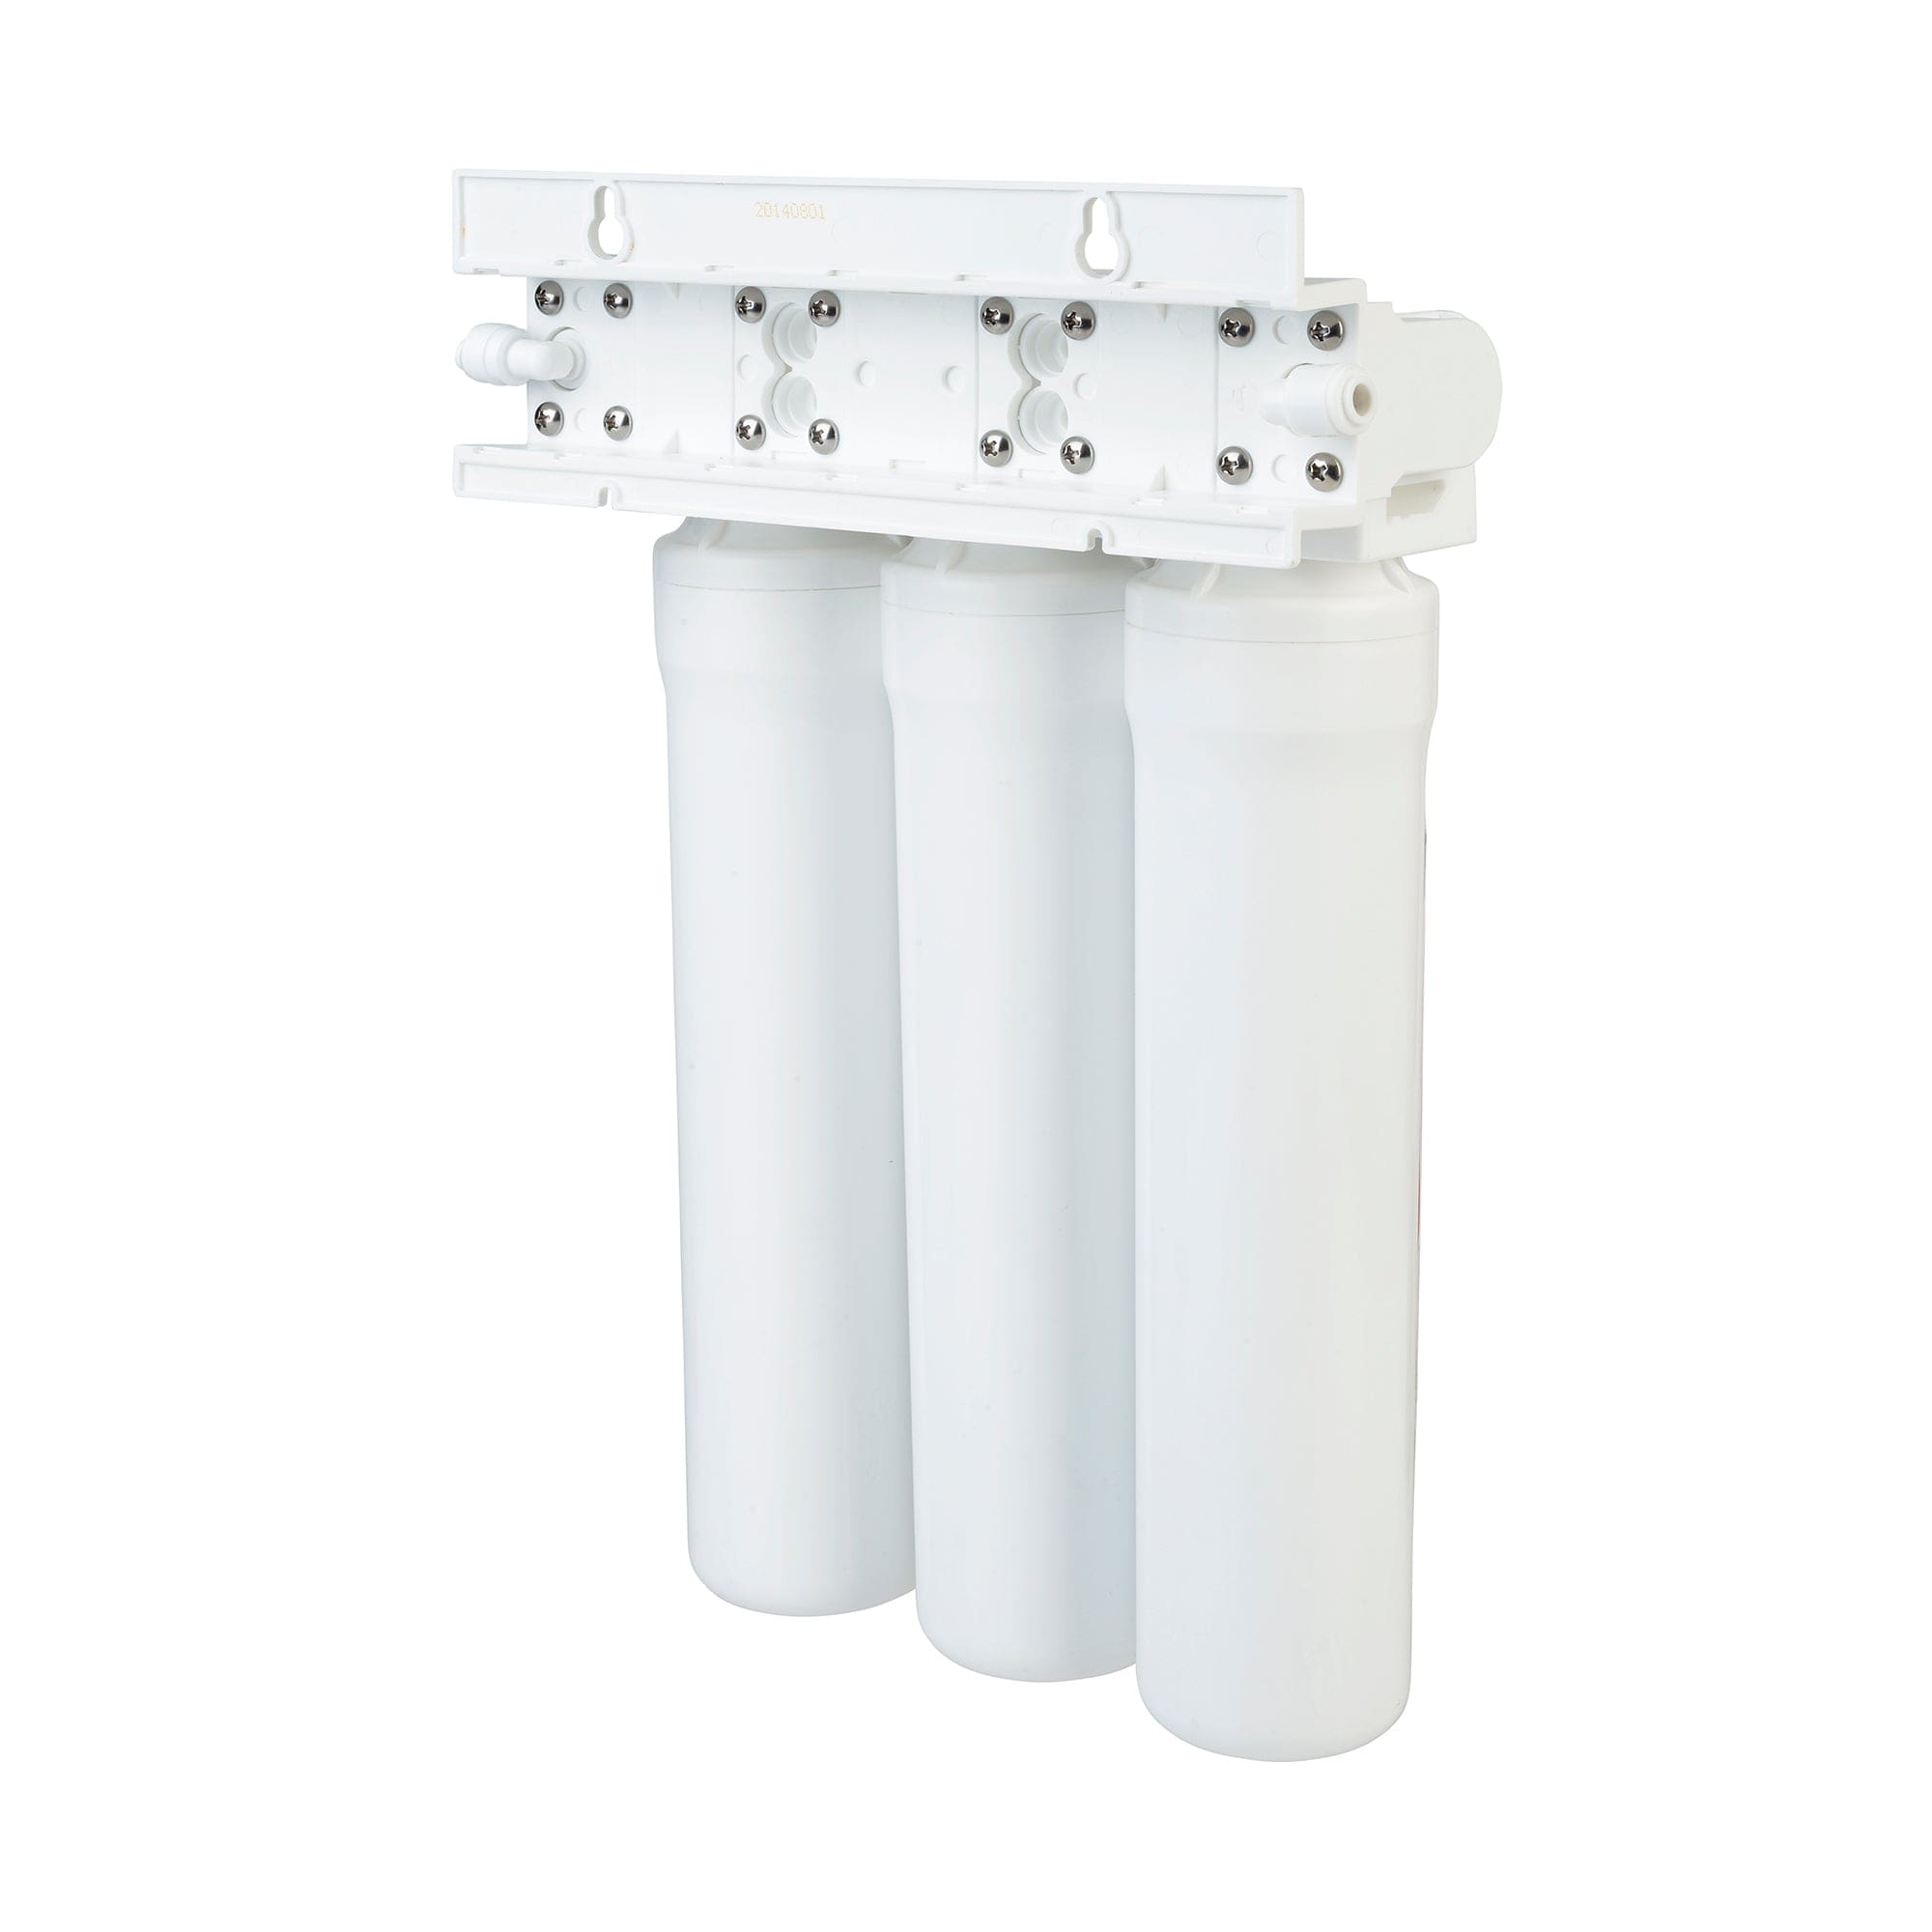 H2O+ Coral Three-Stage Undercounter Water Filtration System UC300 - Molaix - Molaix819911013524H2O+ UNDERCOUNTERUC300